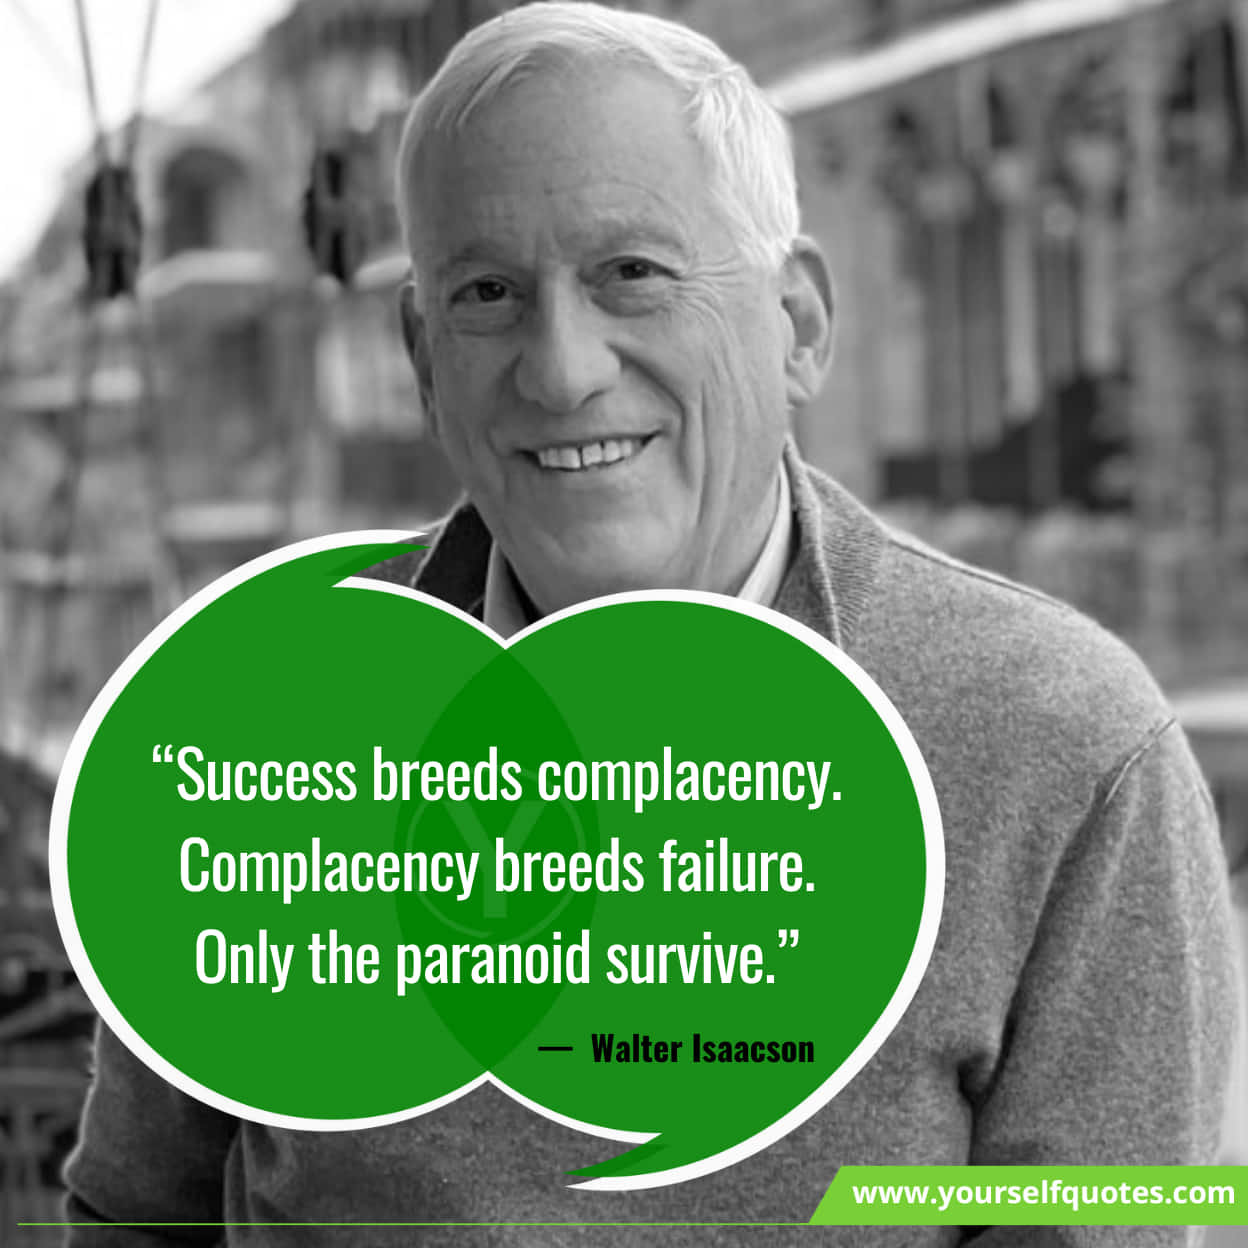 Walter Isaacson Quotes About Success